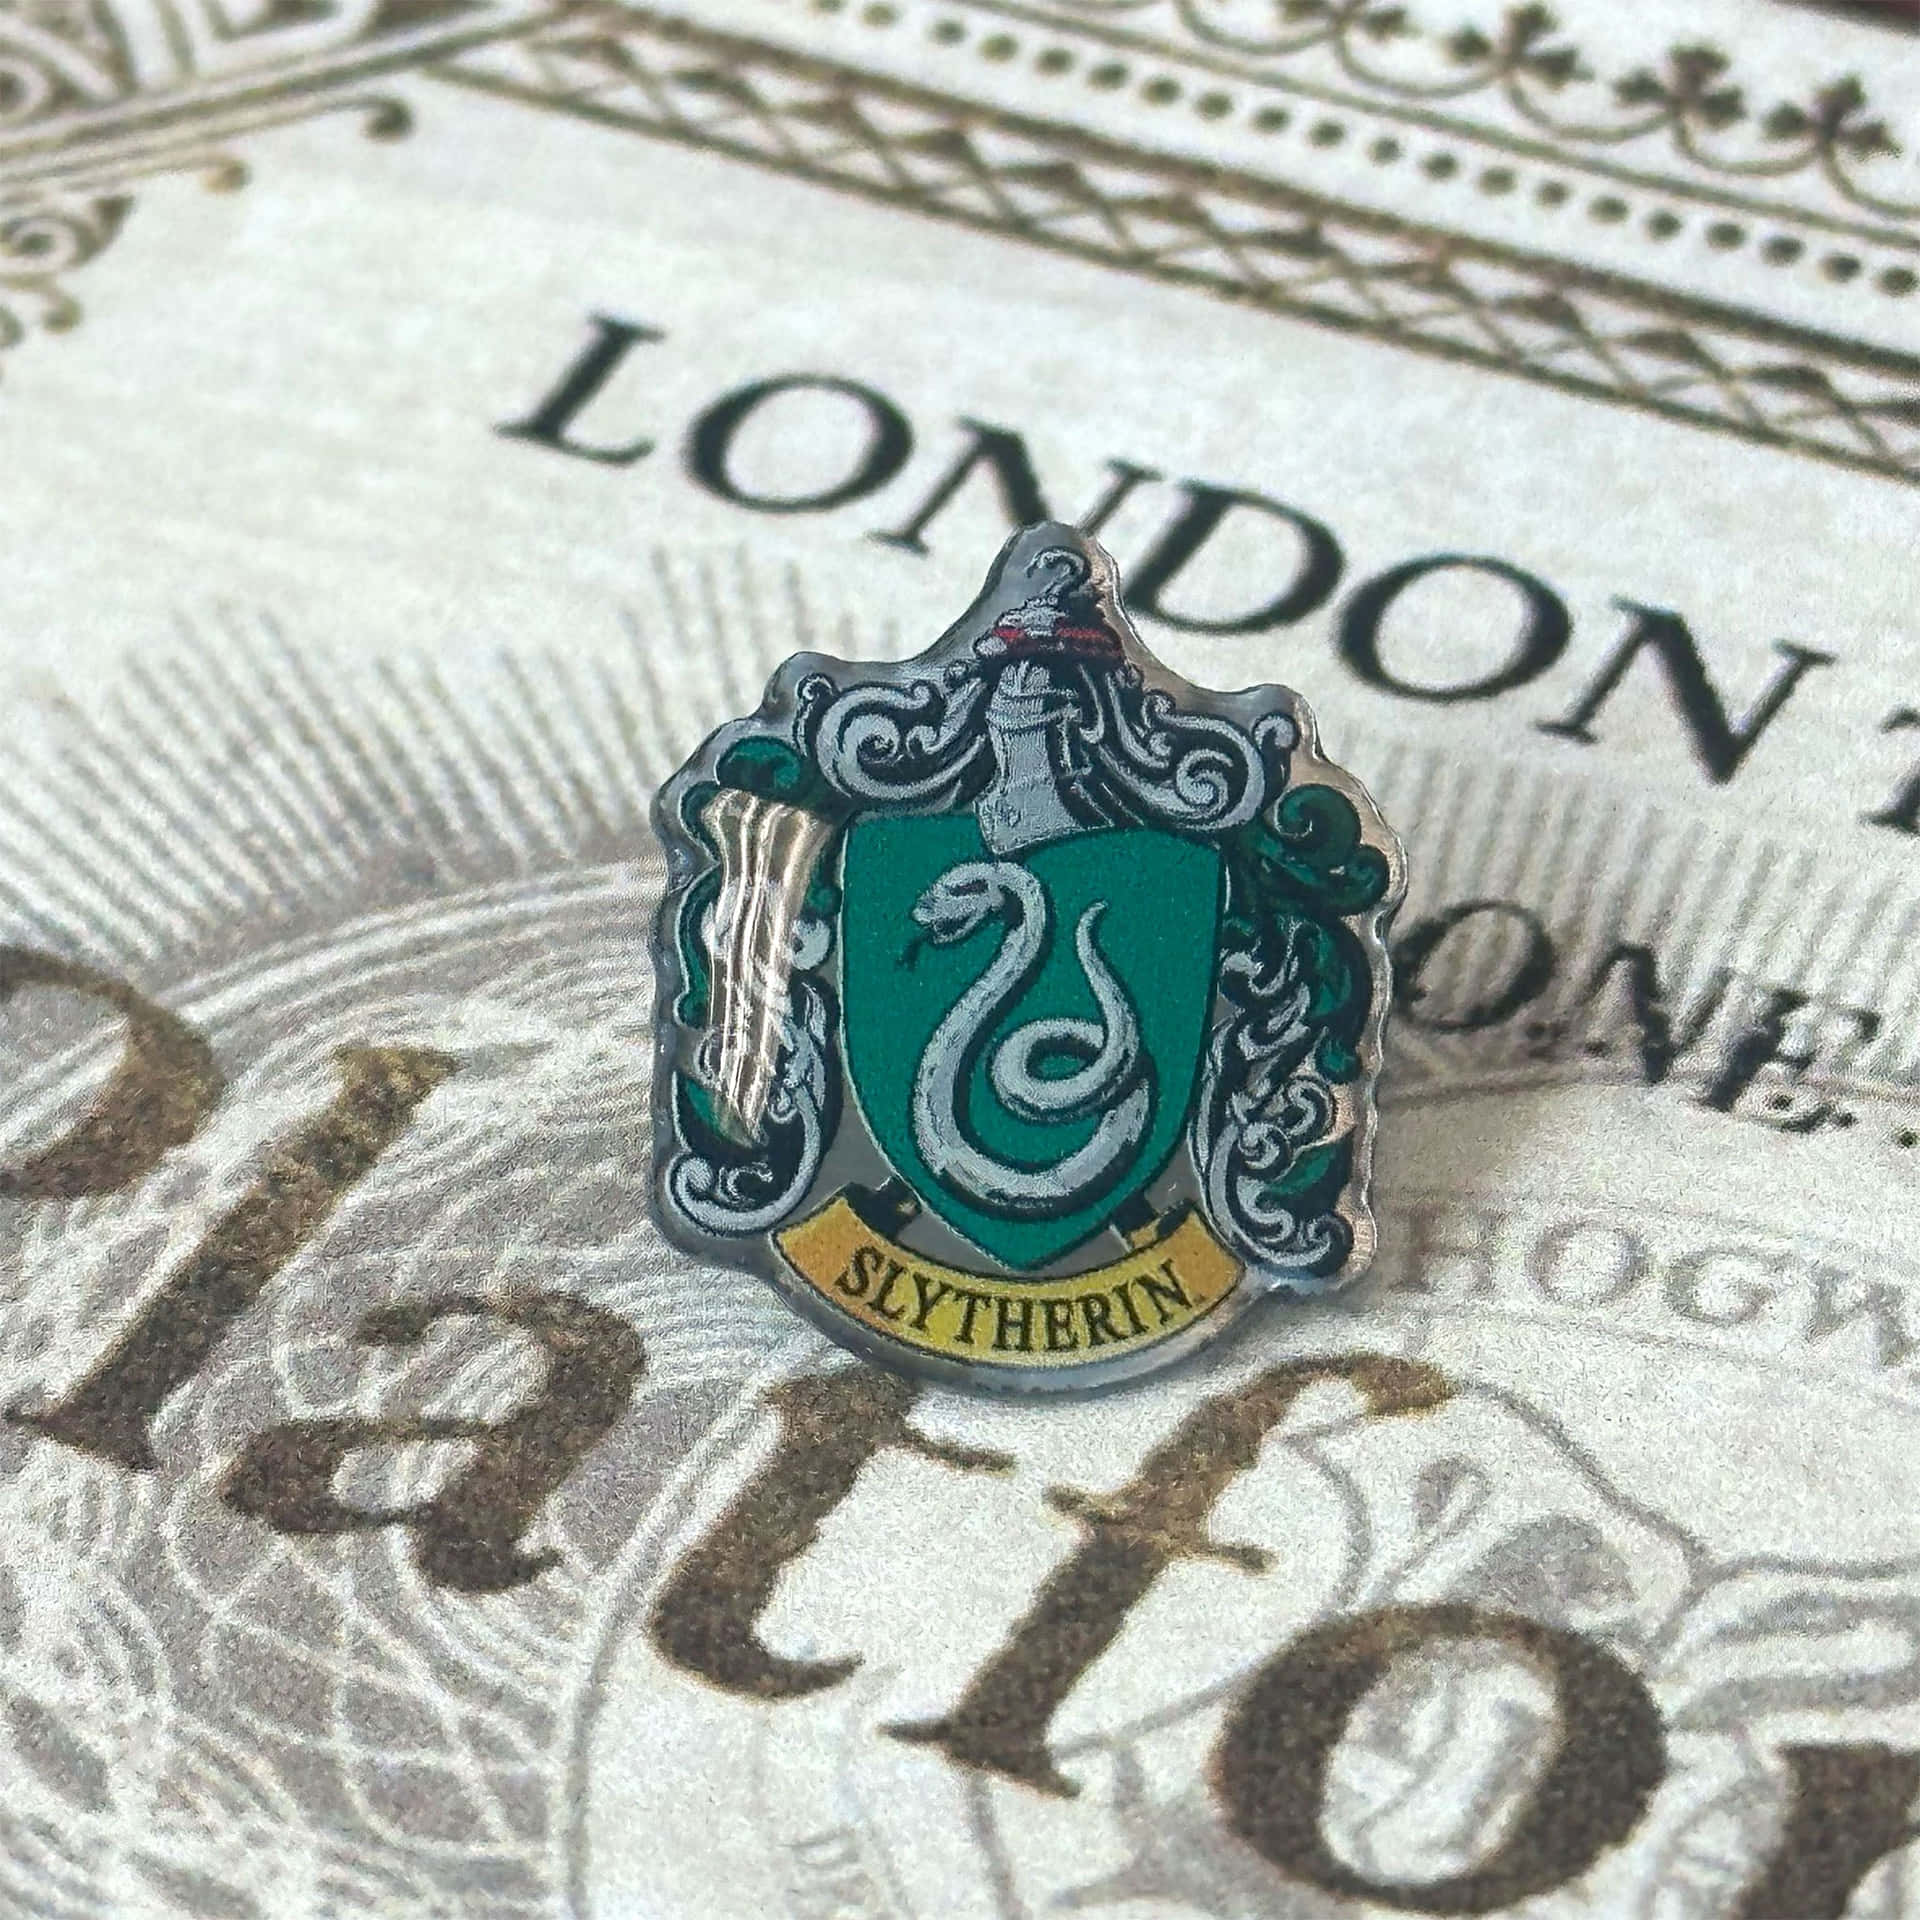 Be proud of your inner Slytherin!